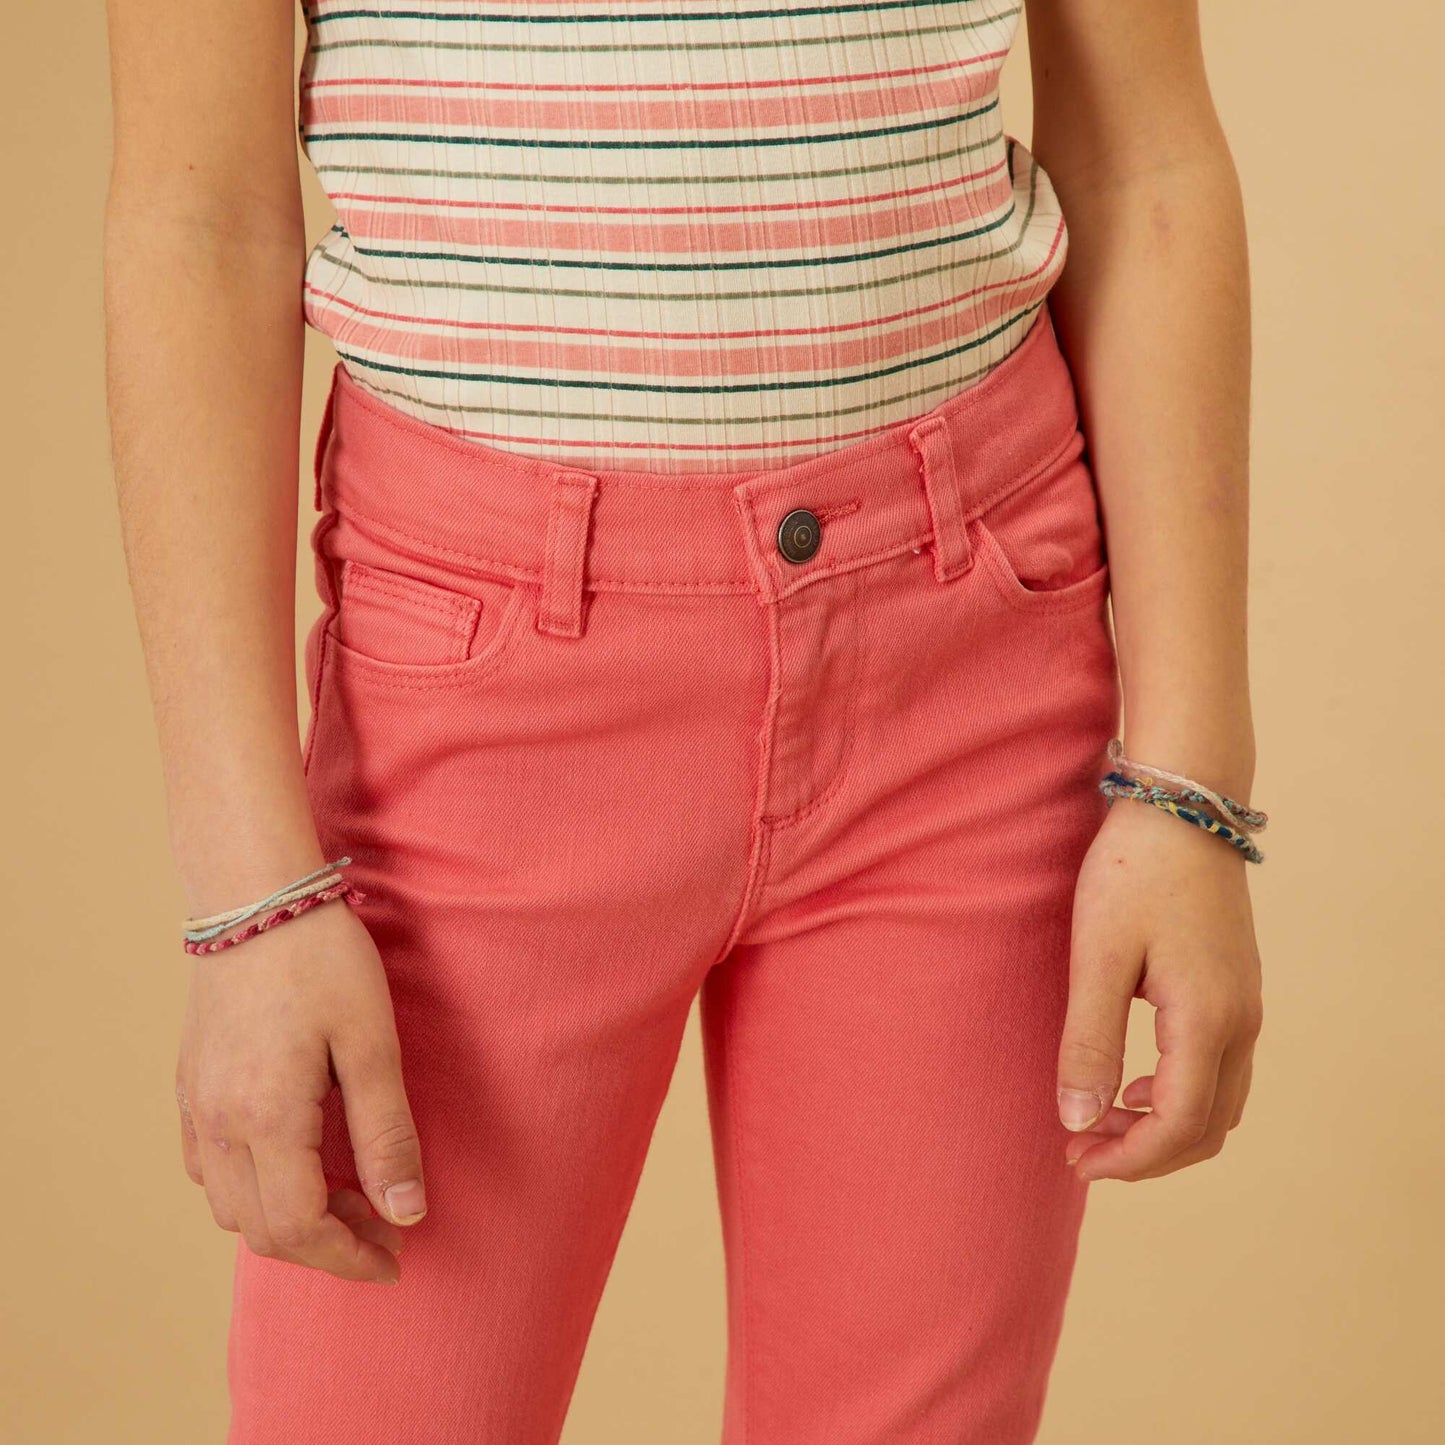 Plain trousers pink